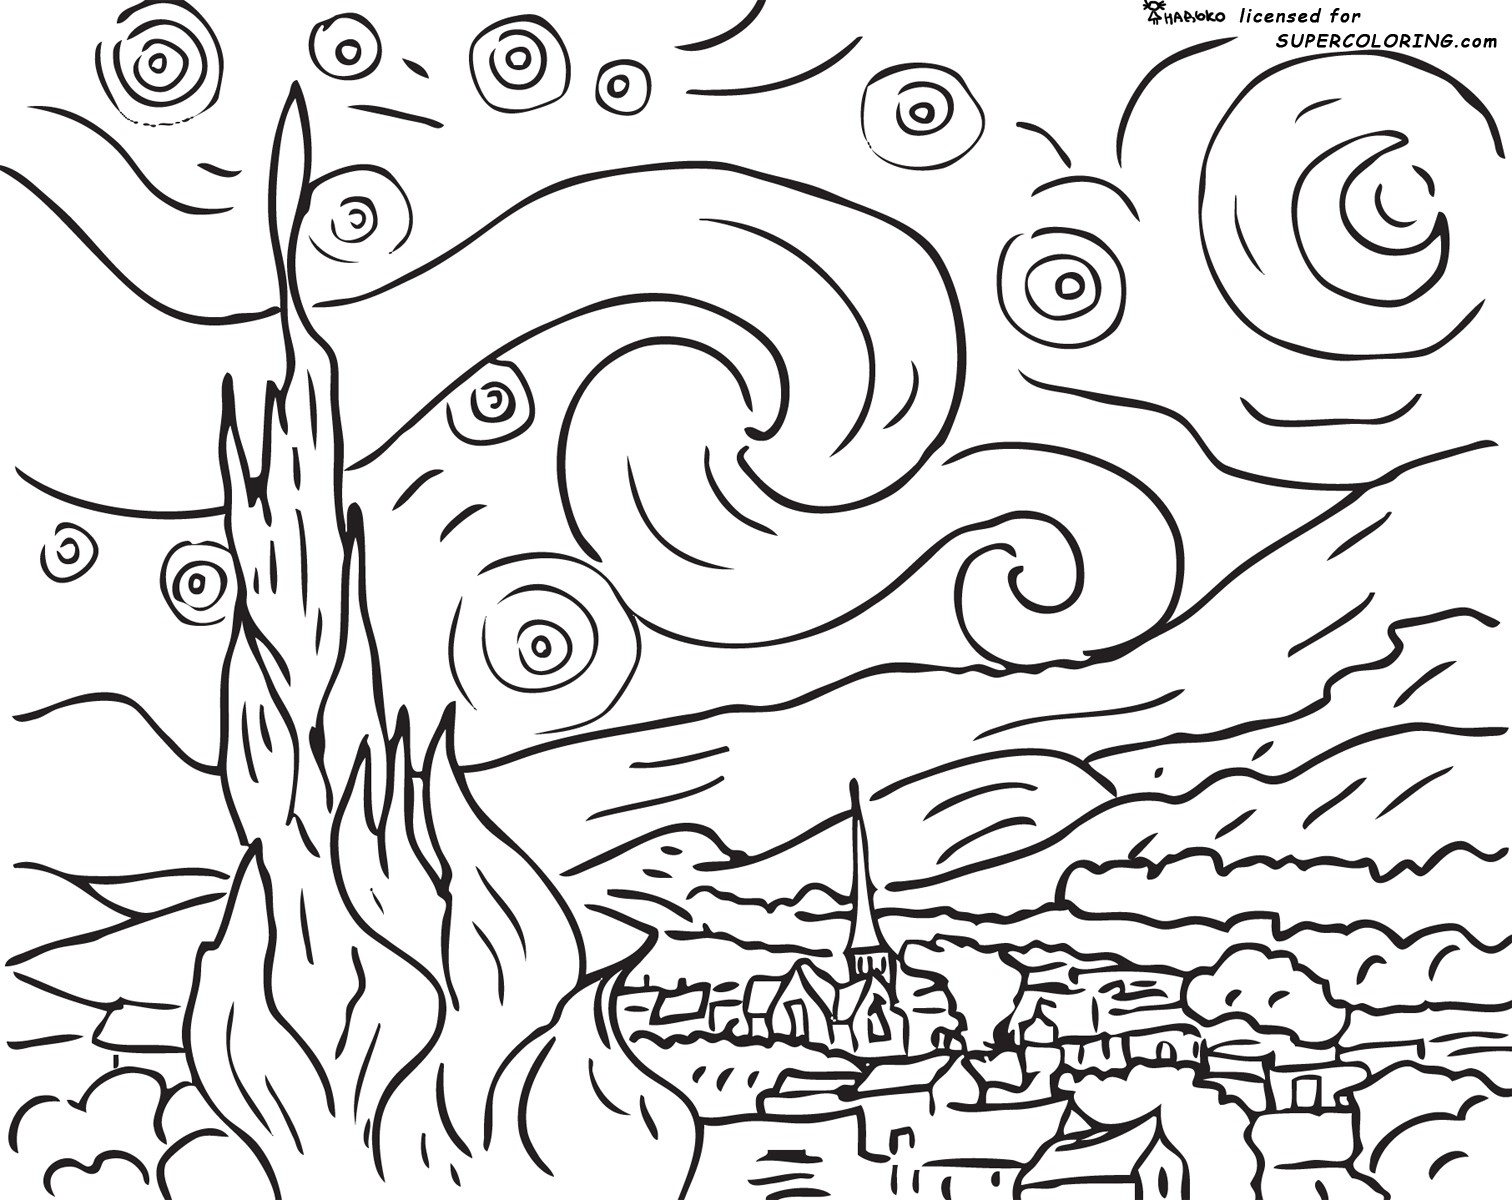 Cool Coloring Pages Item 16028 Cool Designs Coloring Pages Pages ...